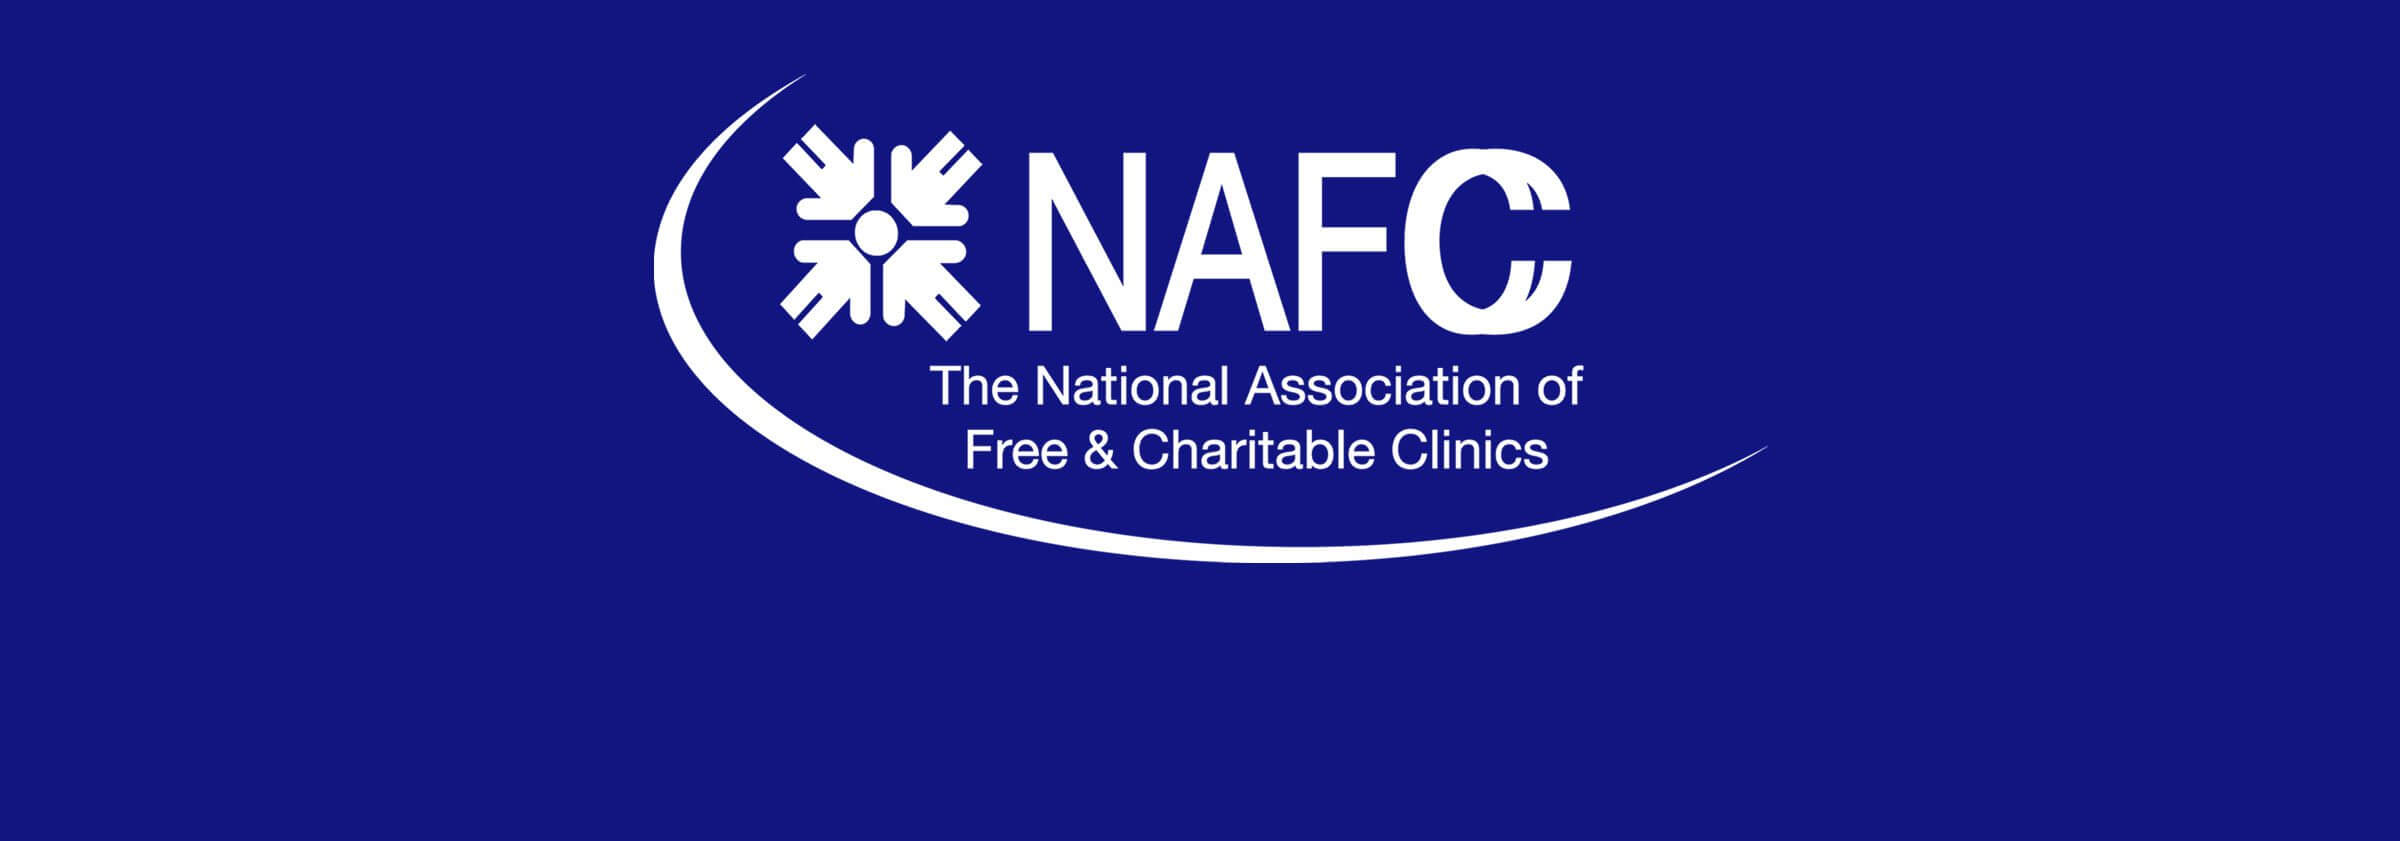 NAFC Written Testimony to Subcommittee on Health Energy and Commerce